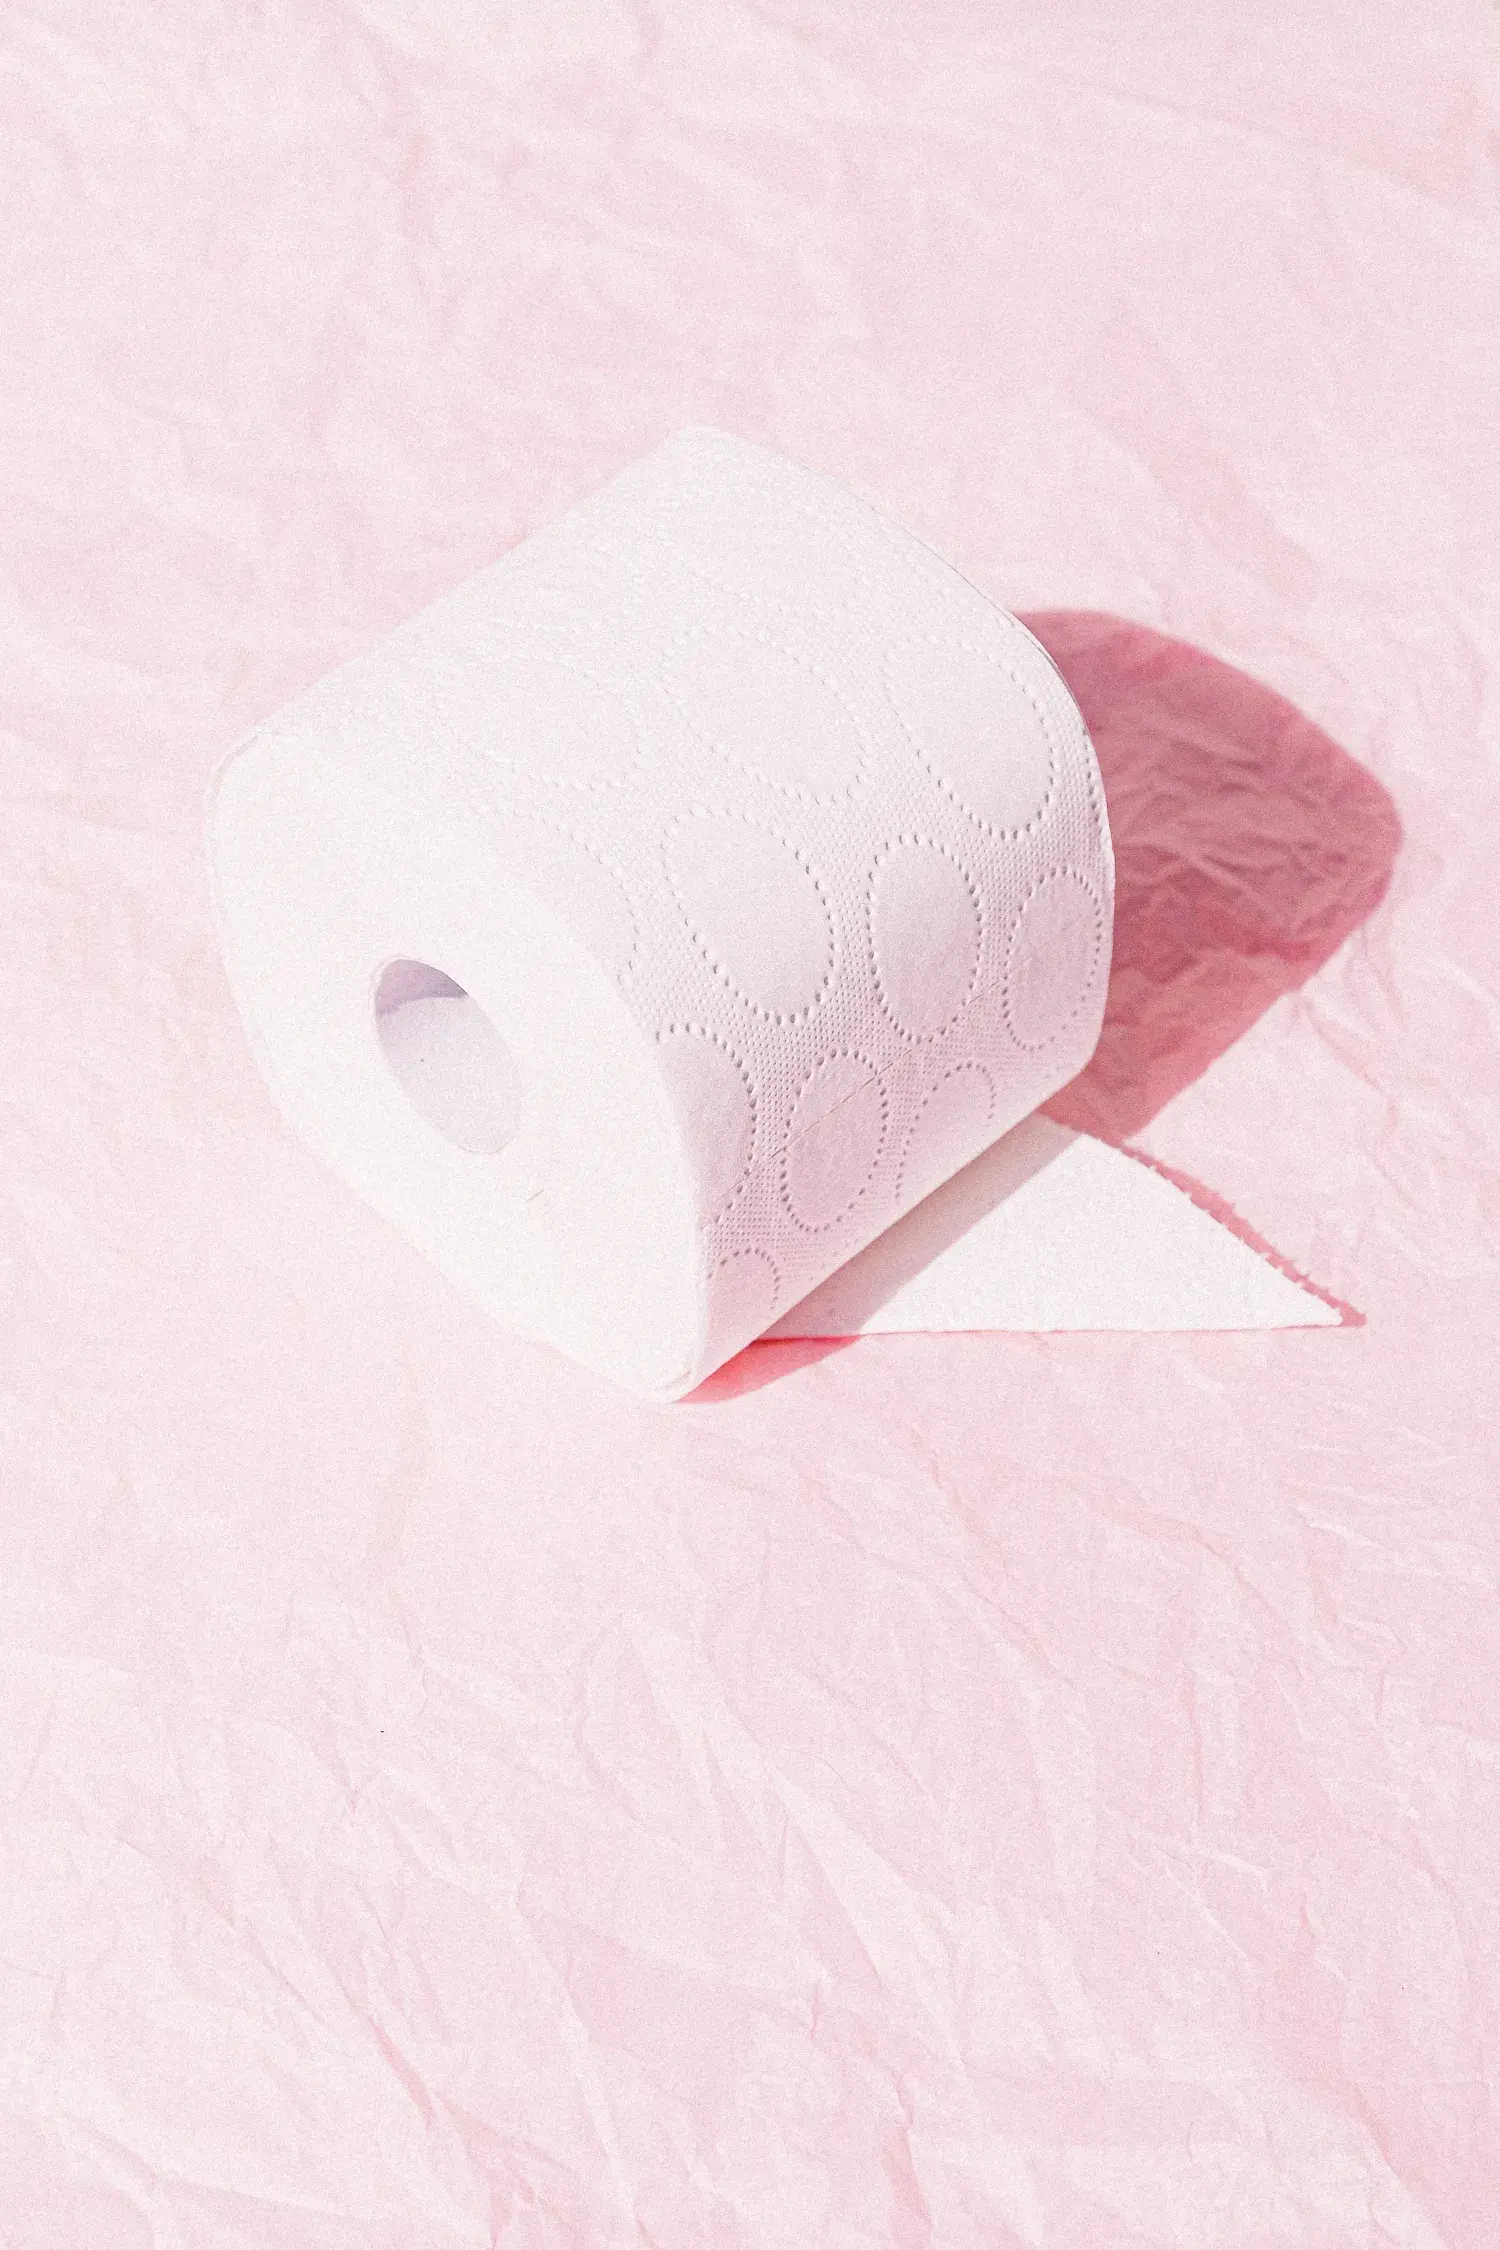 Toilet Paper Day Visual